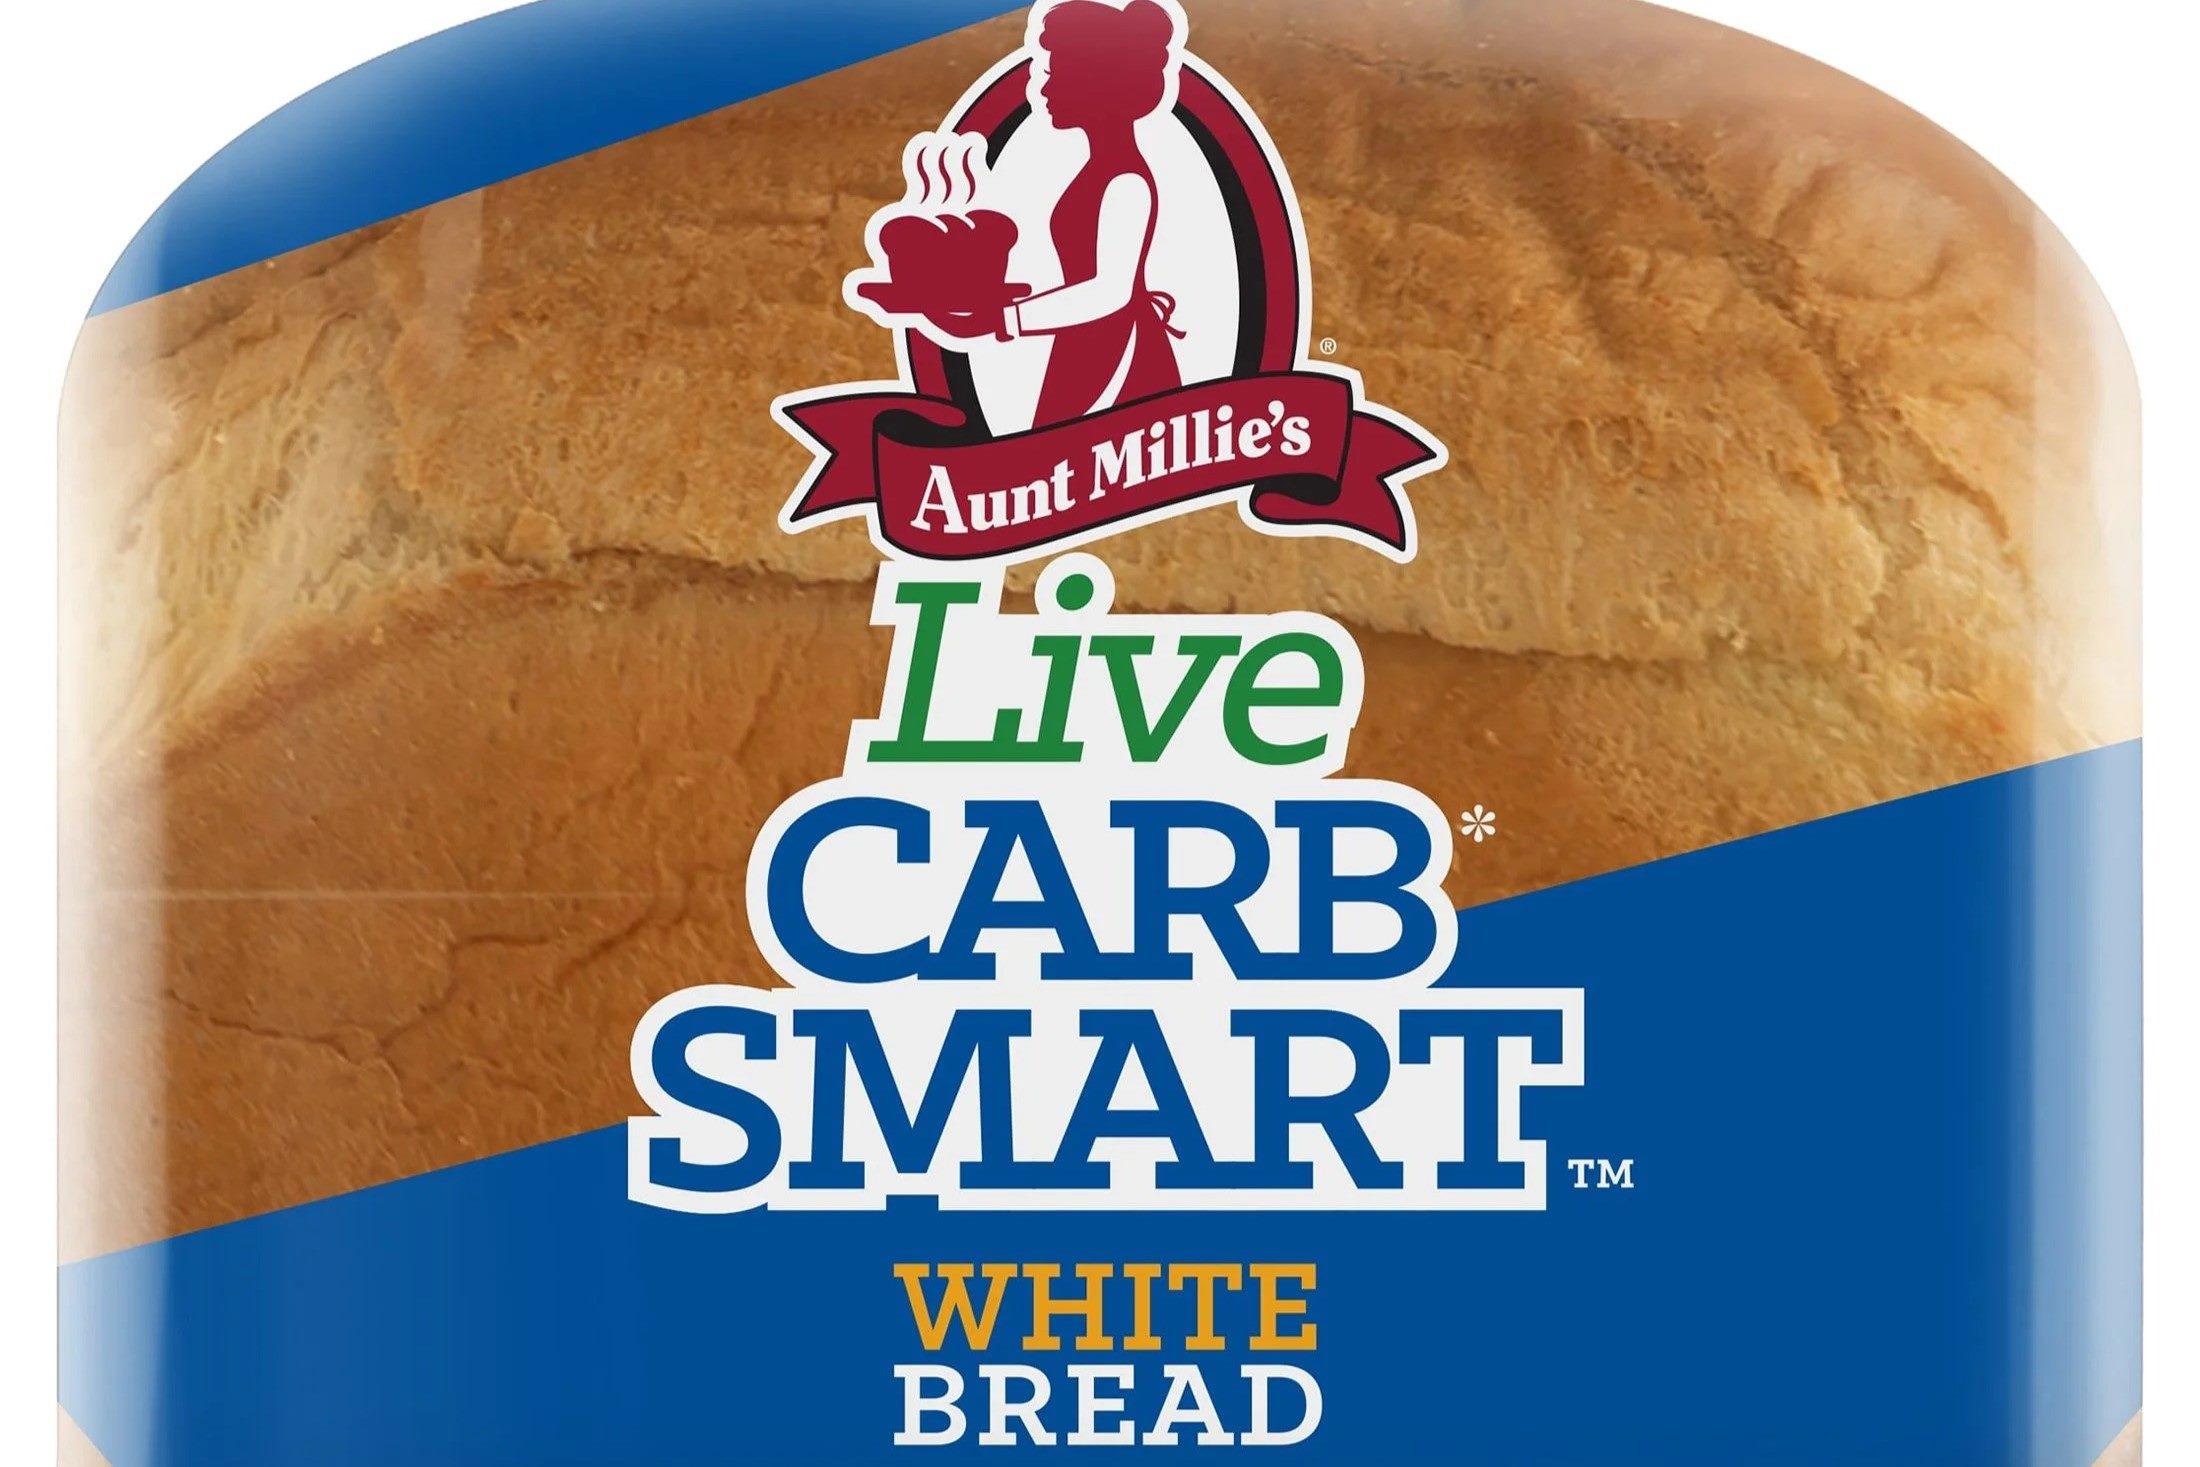 19 Aunt Millie'S Low Carb Bread Nutrition Facts - Facts.net